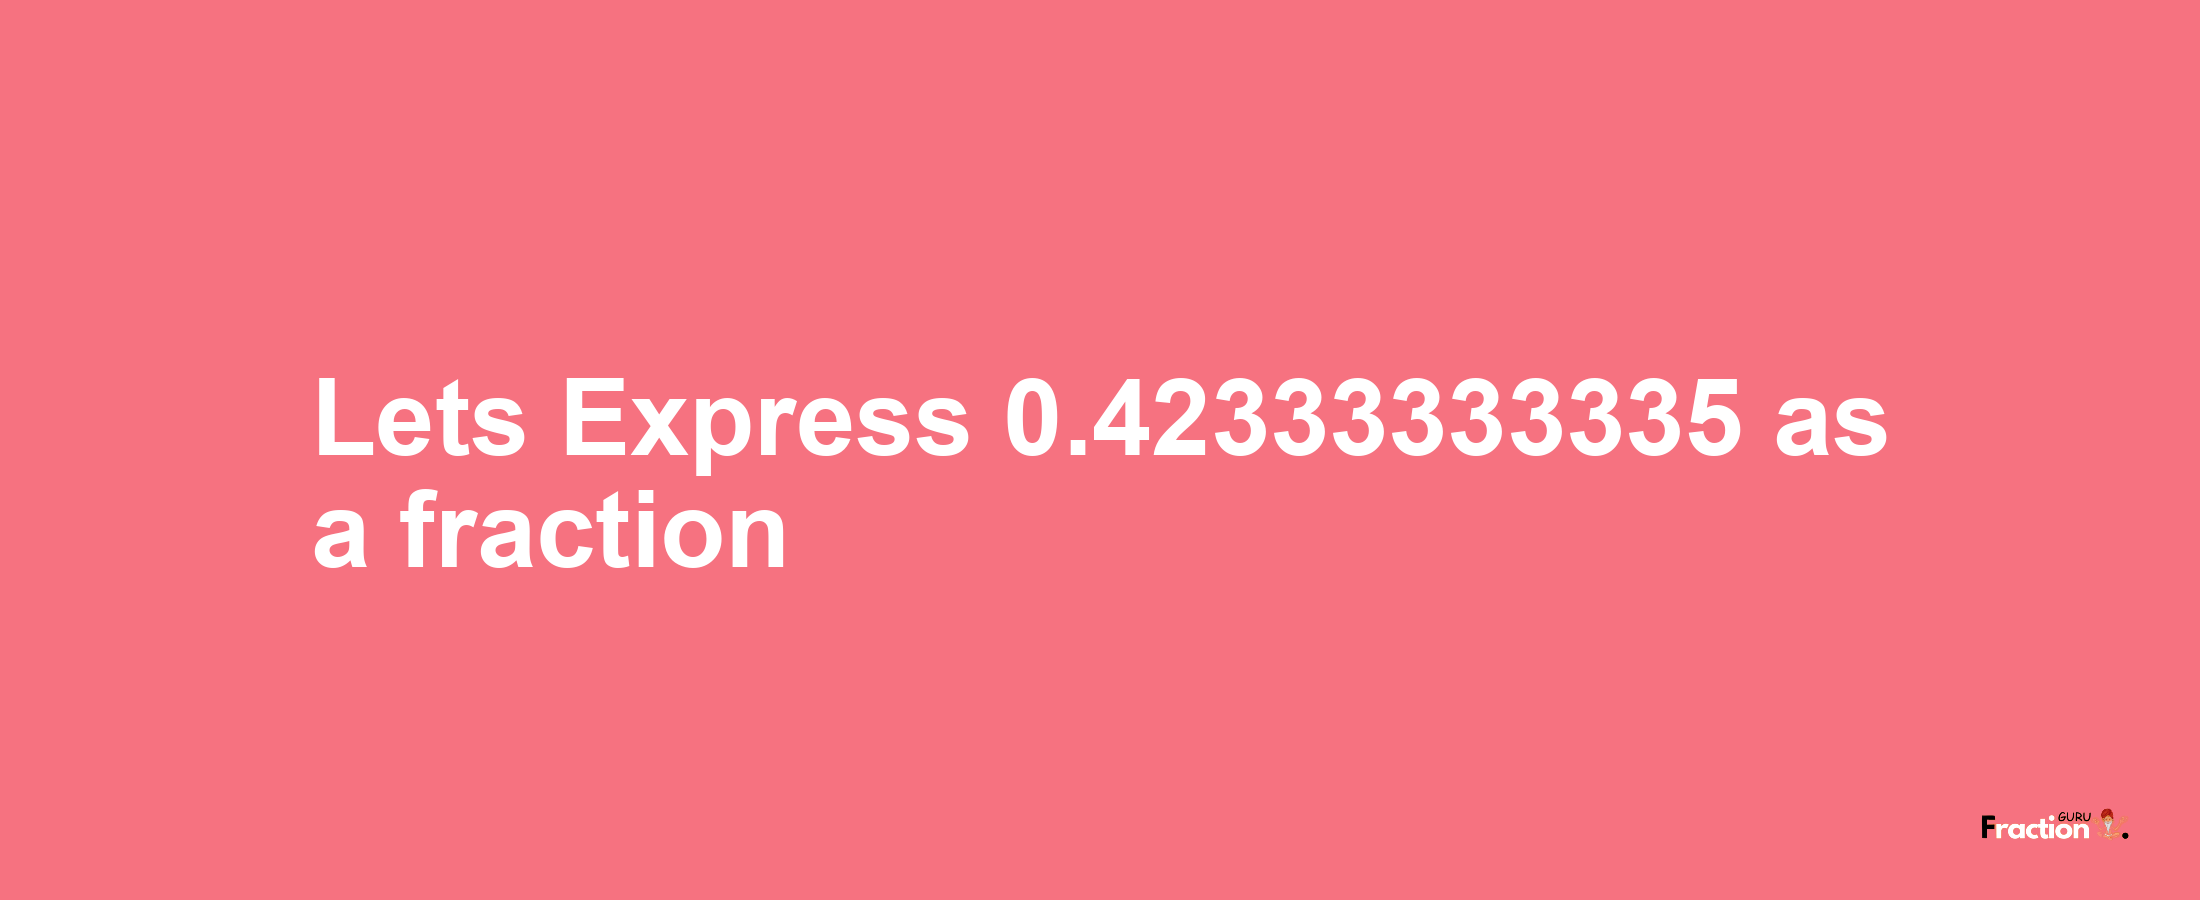 Lets Express 0.42333333335 as afraction